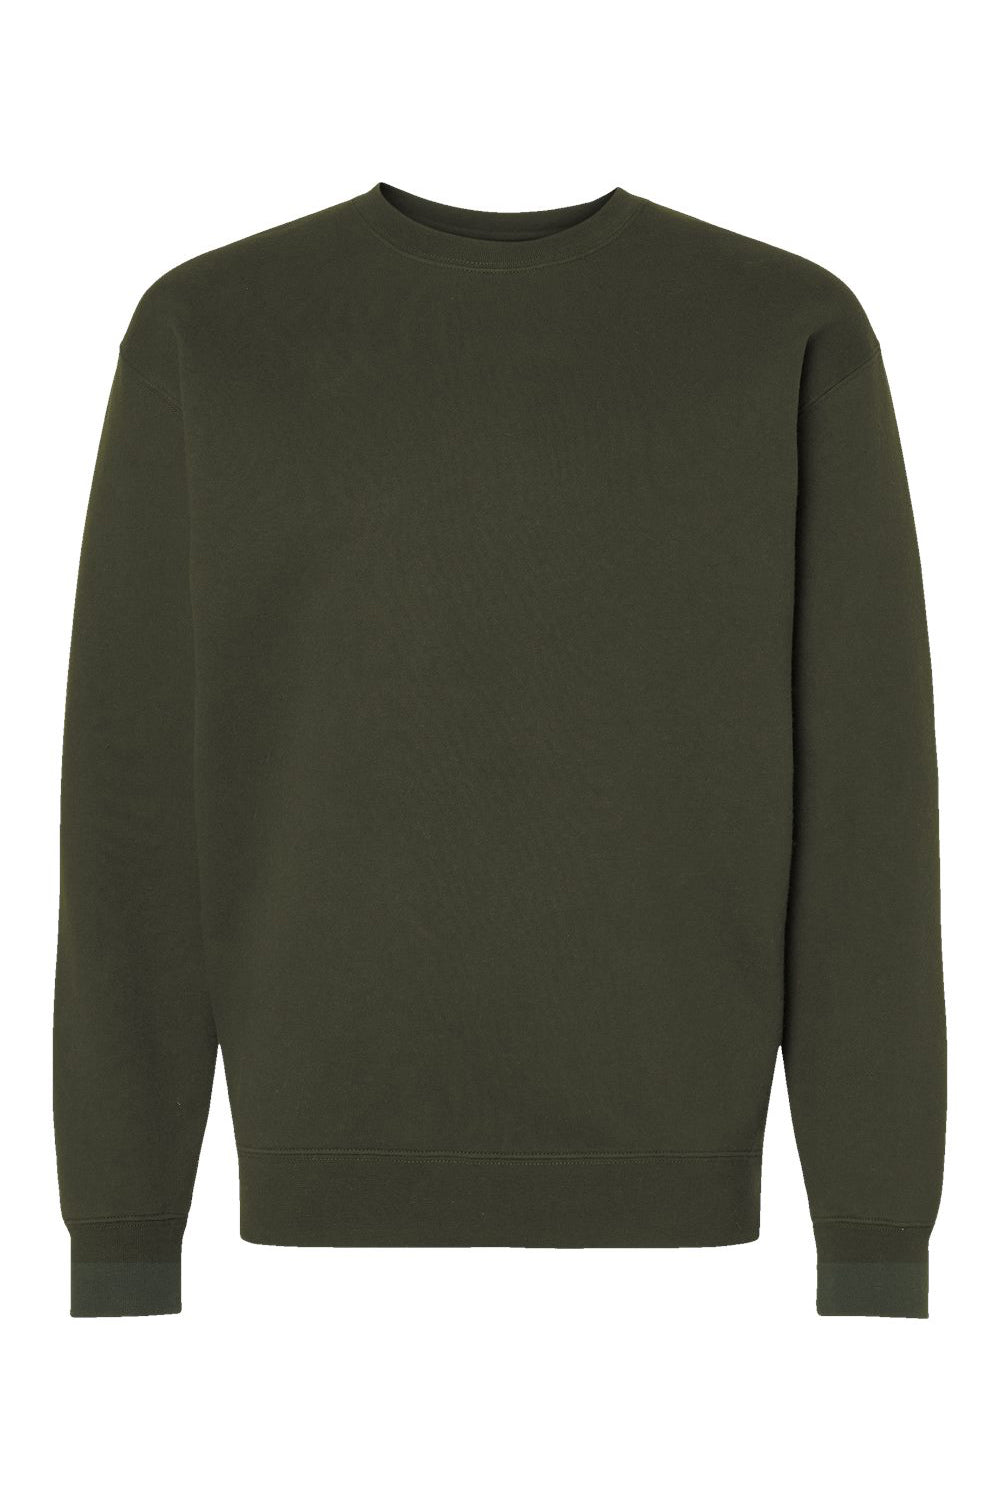 Independent Trading Co. IND3000 Mens Crewneck Sweatshirt Army Green Flat Front